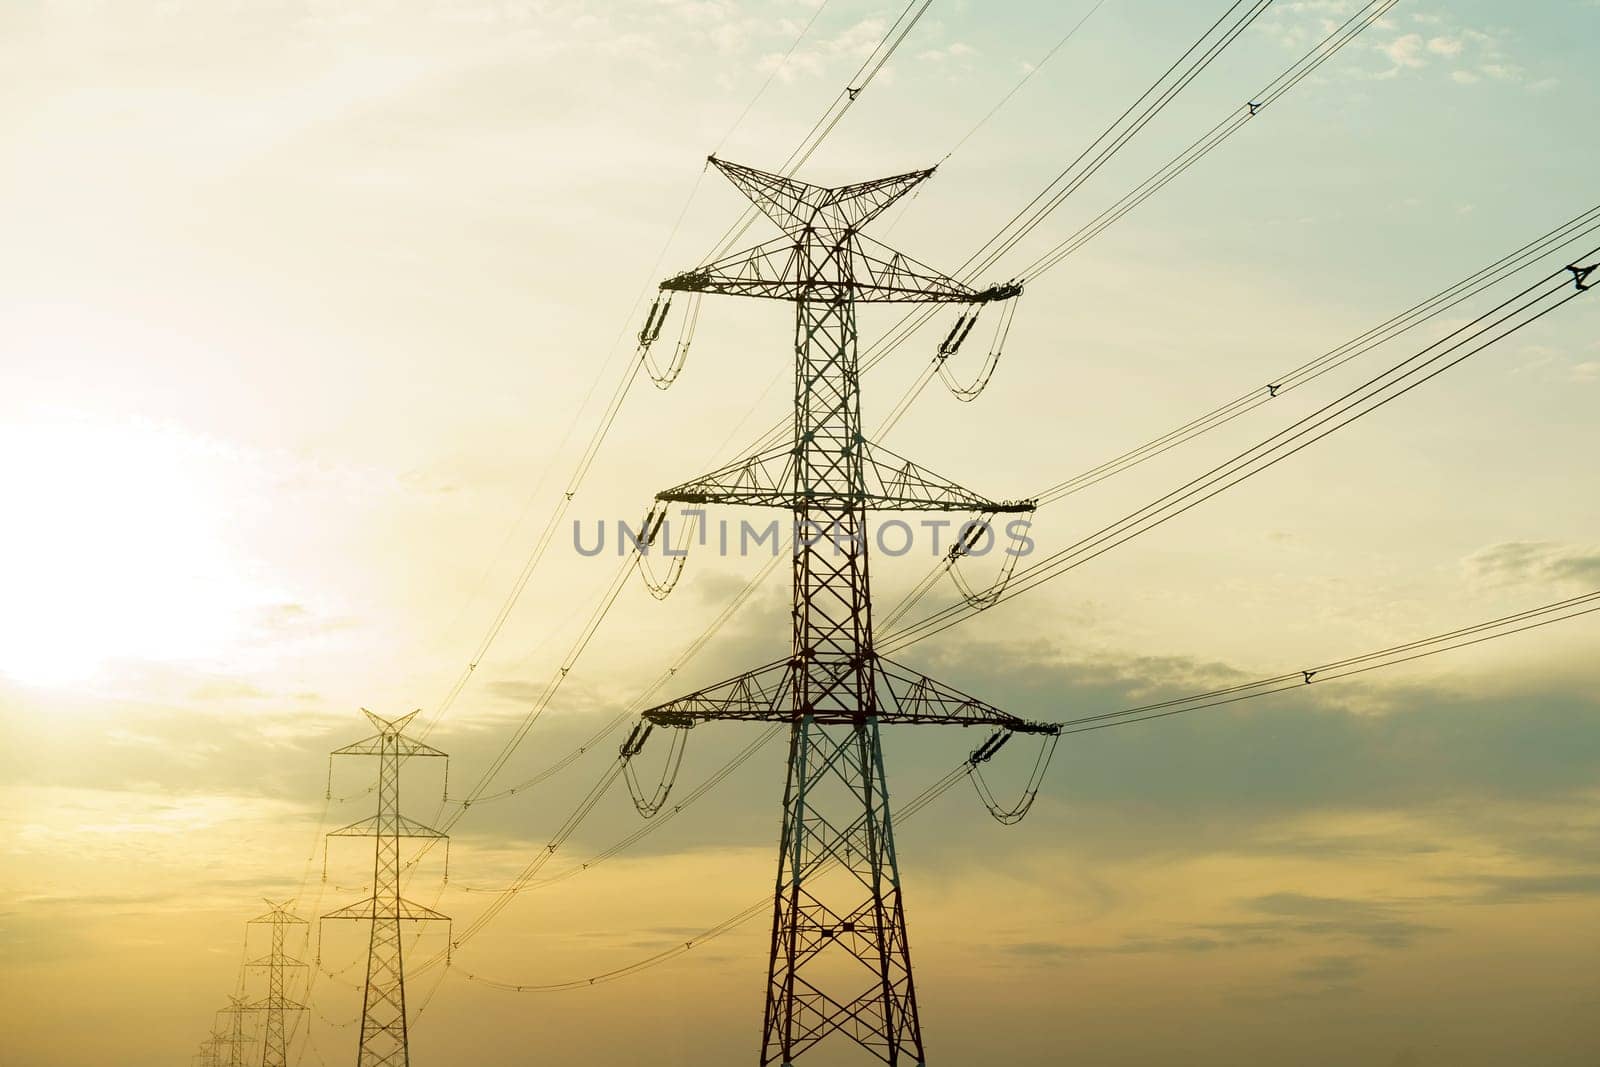 A high voltage power line stands tall against a bright sun in the background, illustrating energy transmission and power distribution infrastructure.